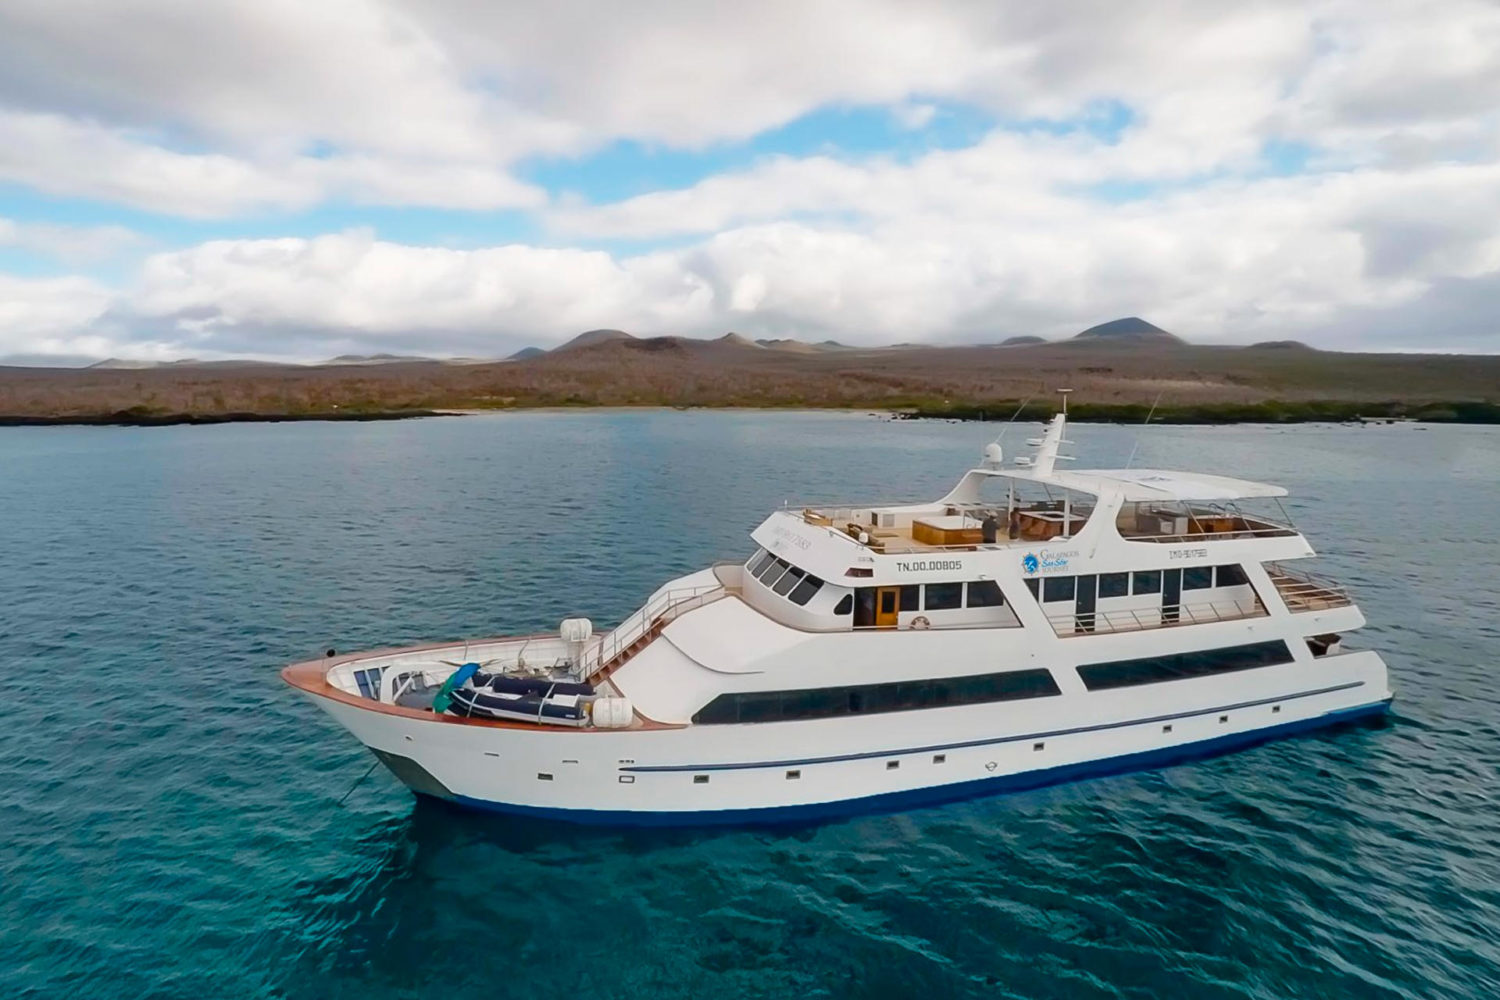 M/Y Sea Star Journey Galapagos Cruise - Air View